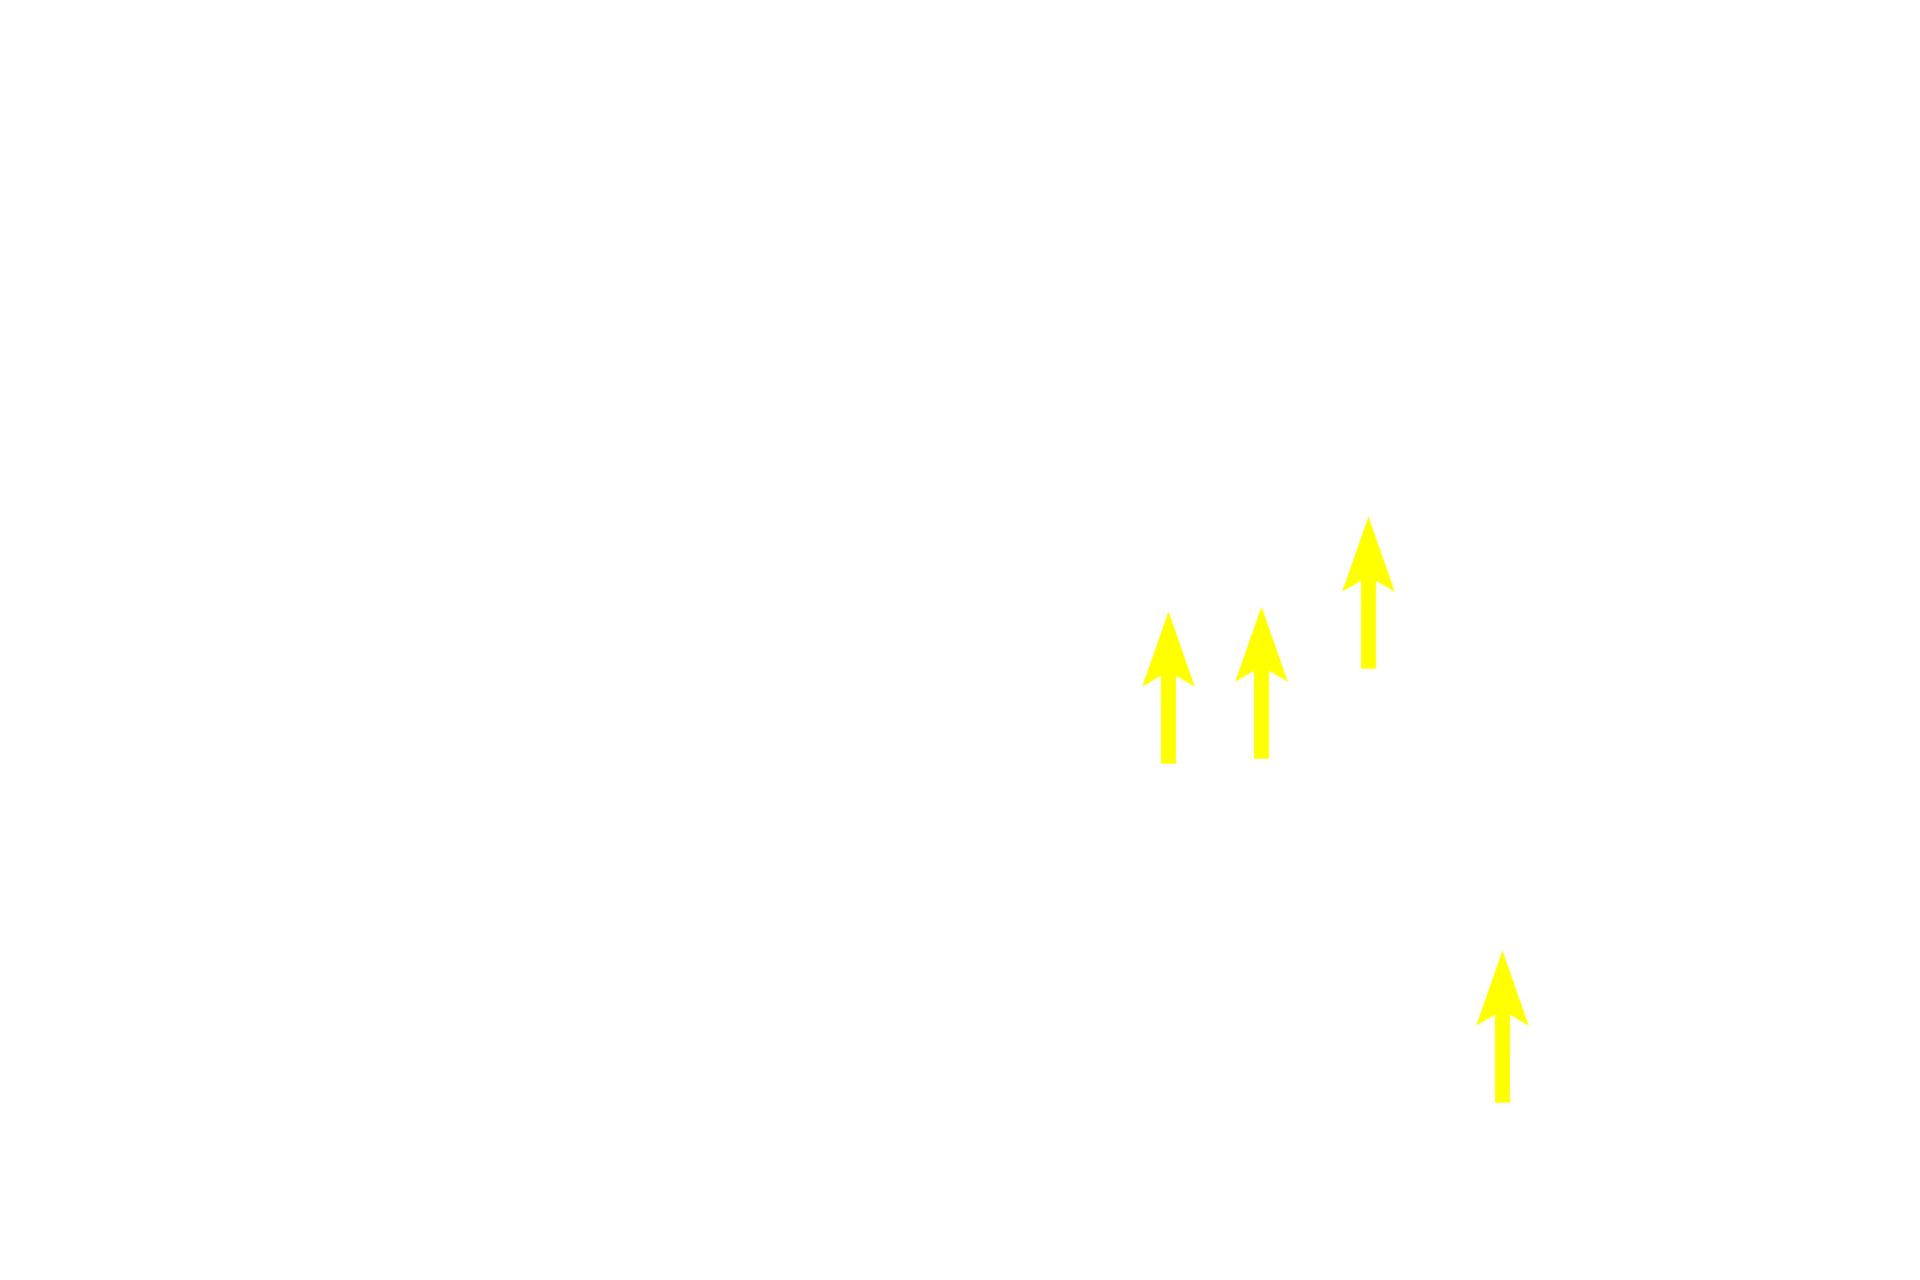 Schwann cells <p>These multipolar neurons are located in an autonomic ganglion in the sympathetic division of the autonomic nervous system.  Sympathetic ganglia are generally located at some distance from the organs they innervate and contain large numbers of both incoming preganglionic axons as well as exiting, efferent postganglionic axons from the multipolar neurons.  The neuron cell bodies are widely dispersed and extend numerous dendrites.  Eccentrically-located nuclei are common.  Satellite Schwann cells surround each neuronal in the ganglion.  Their cytoplasmic processes form a capsule around the cell body. 100x, 1000x</p>
